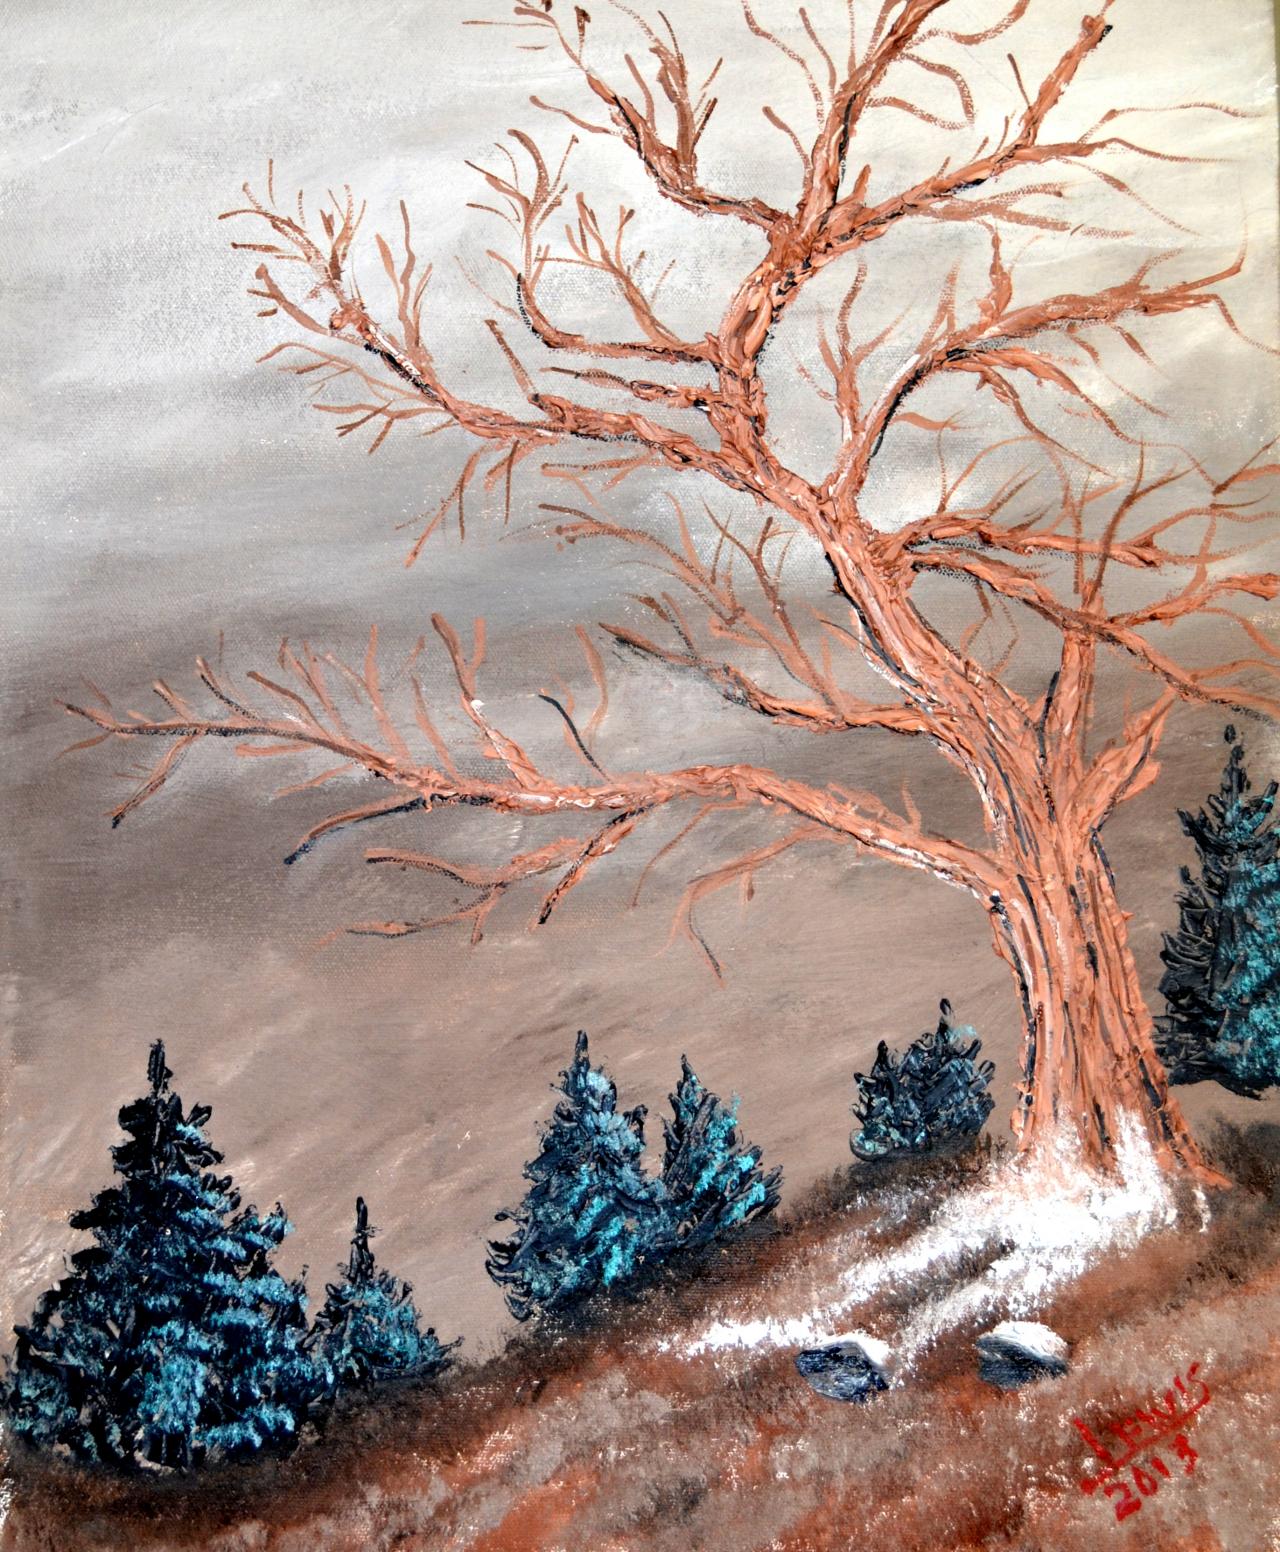 Dead Tree On A Hill Original Painting-